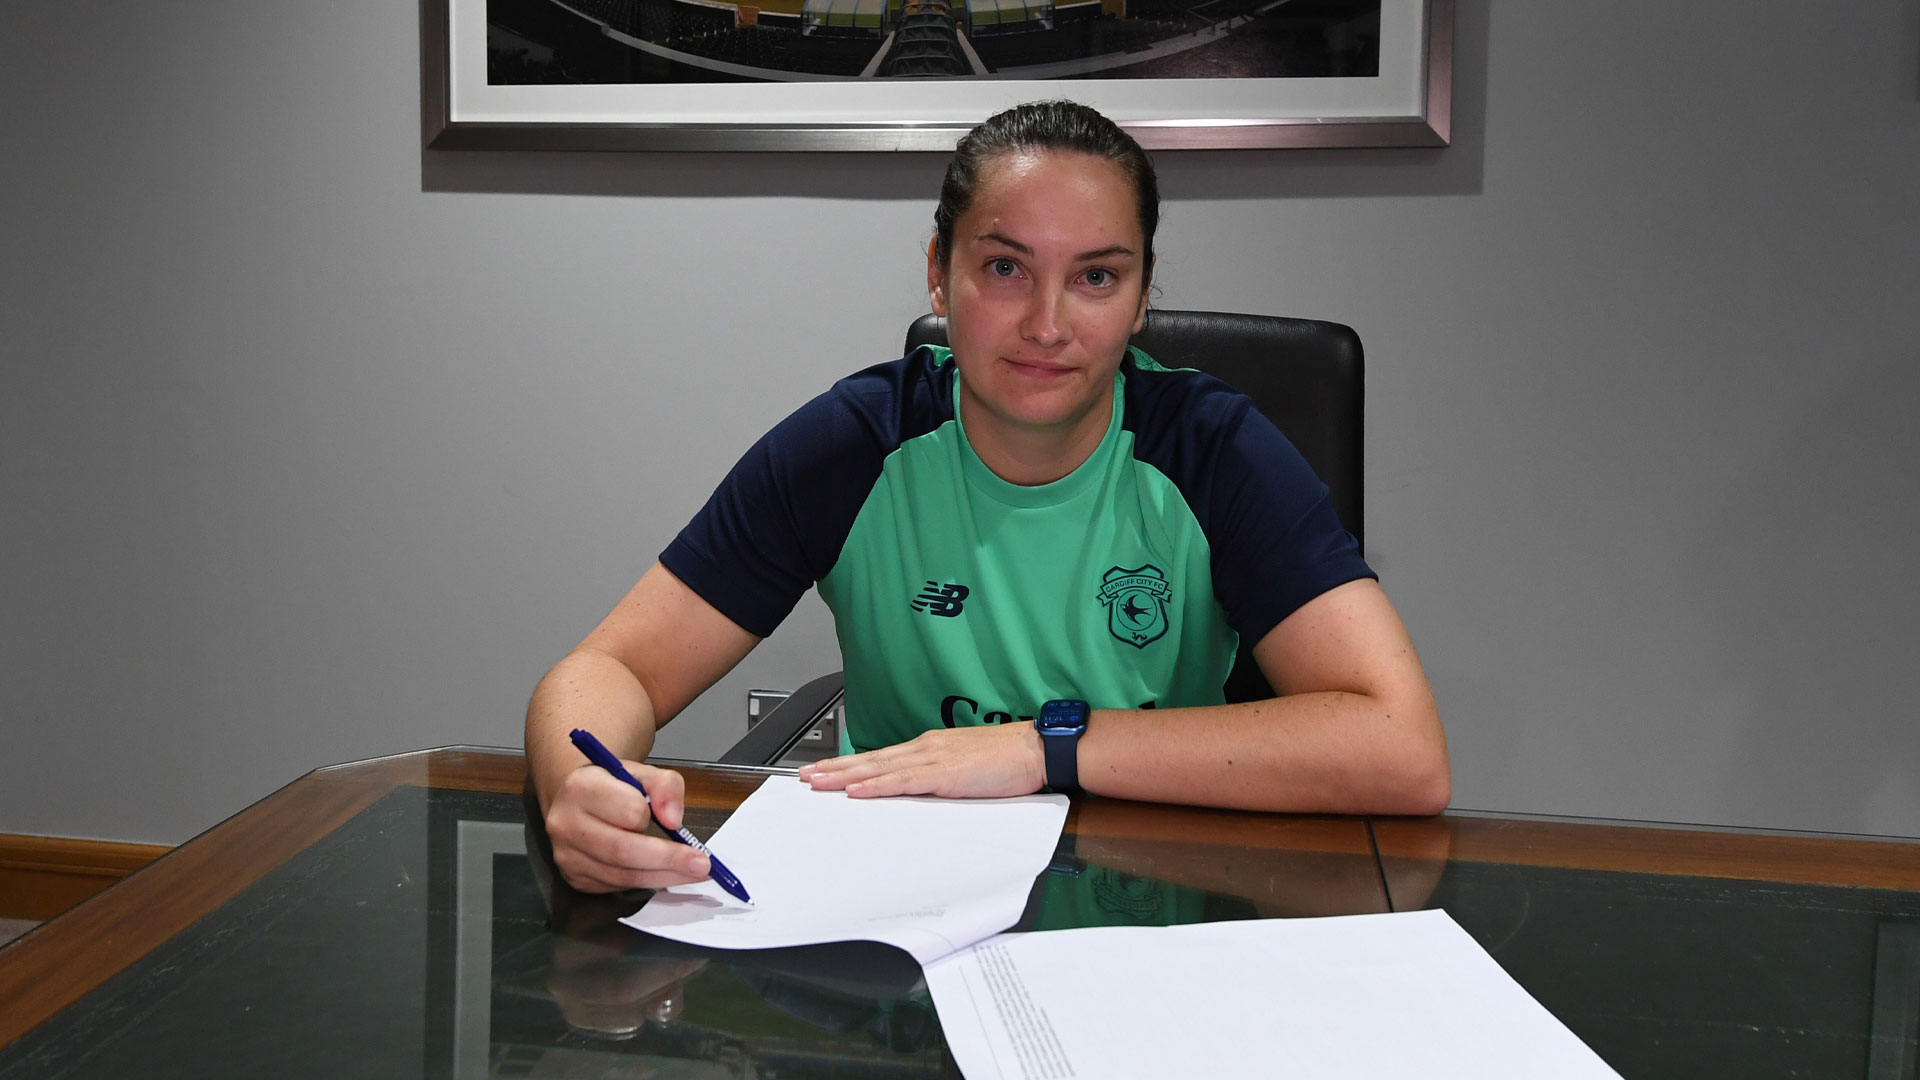 Siobhan Walsh signs a semi-professional contract with Cardiff City Women